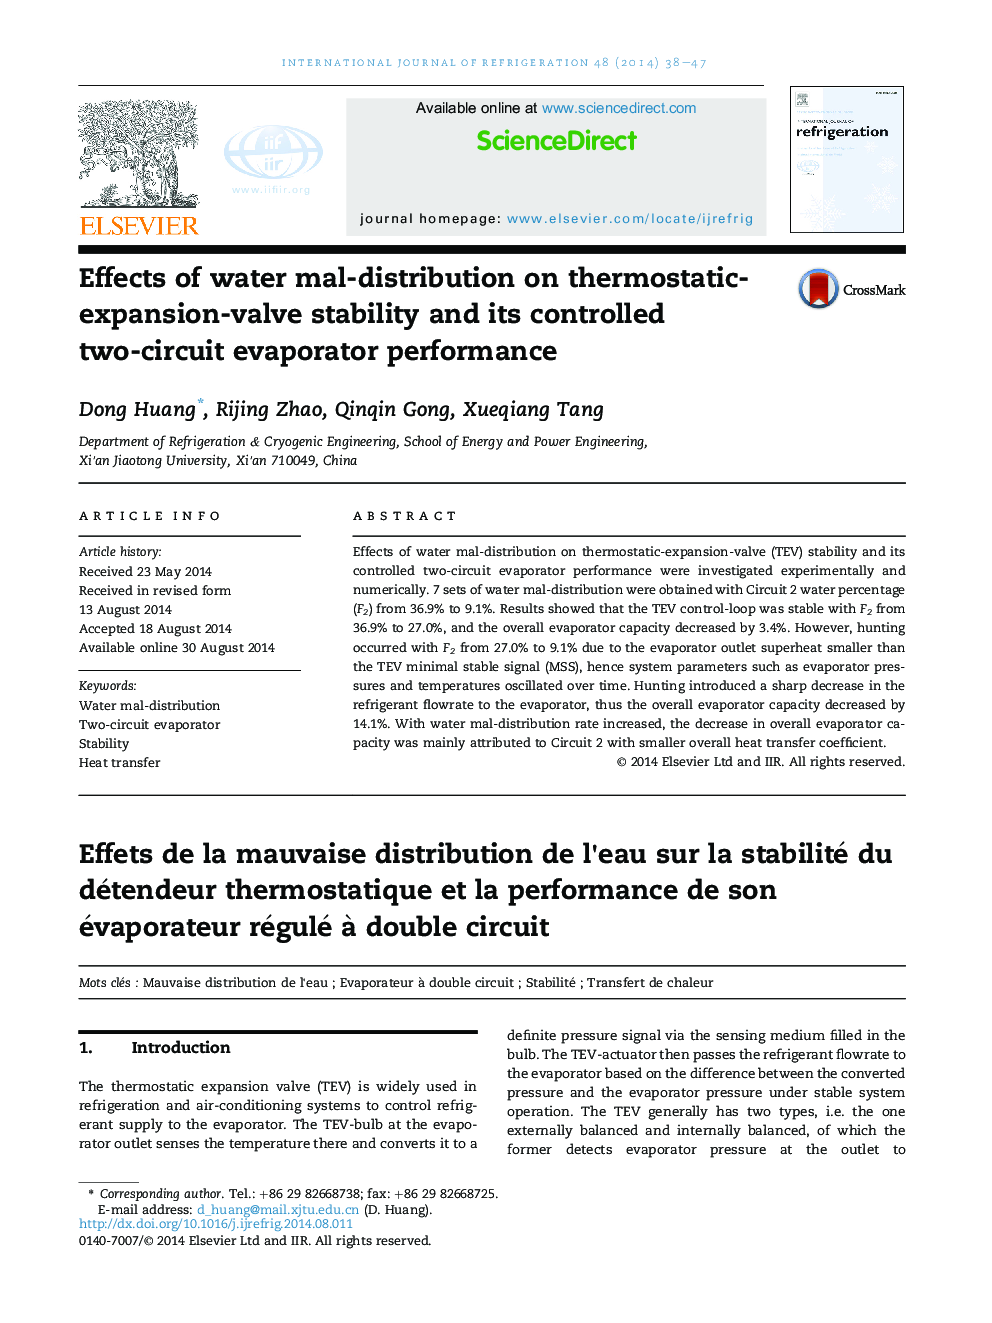 Effects of water mal-distribution on thermostatic-expansion-valve stability and its controlled two-circuit evaporator performance